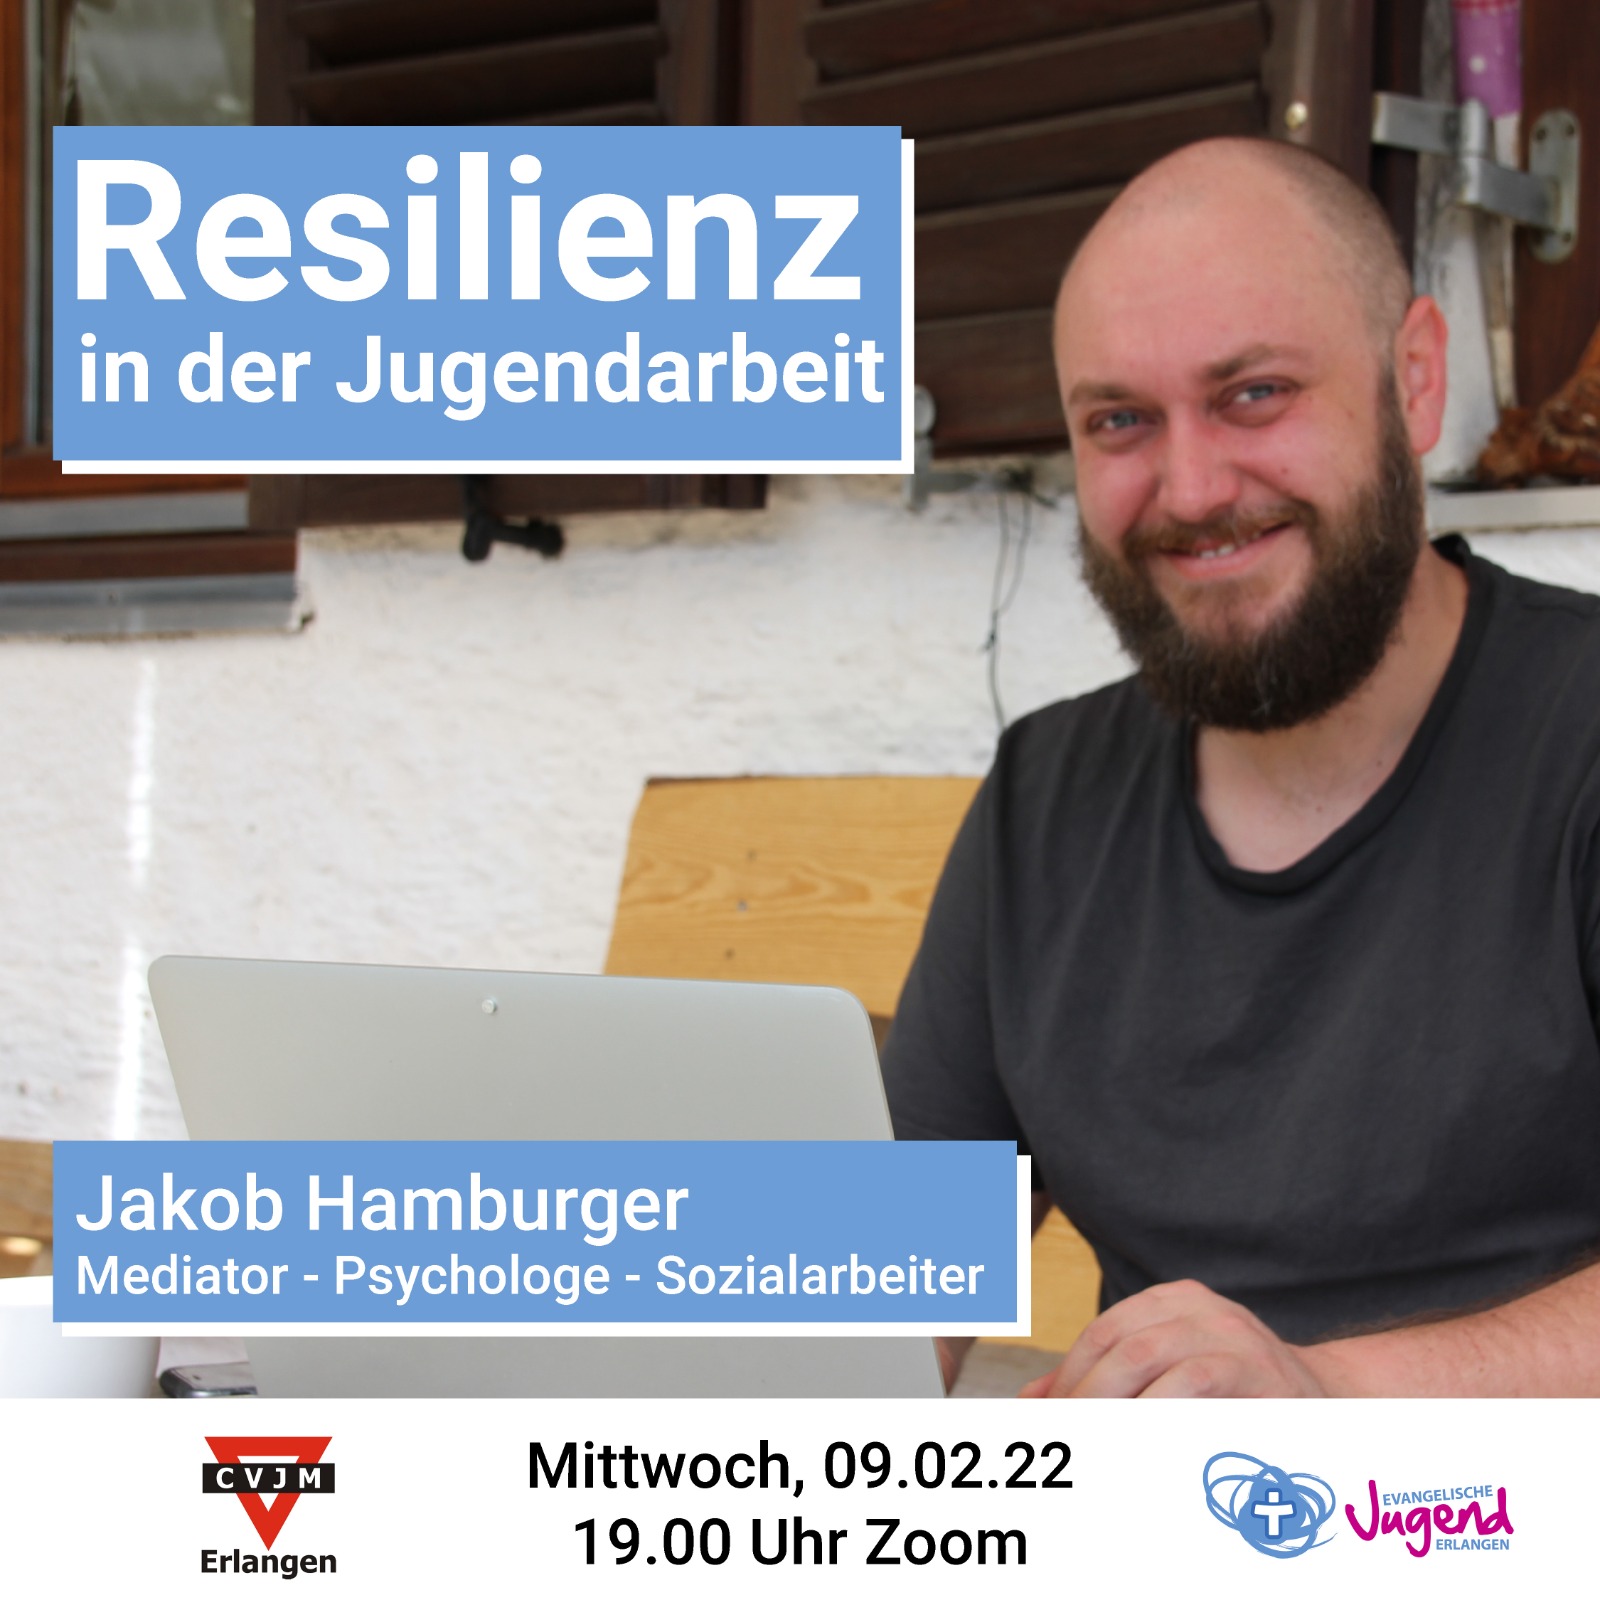 You are currently viewing Resilienz in der Jugendarbeit